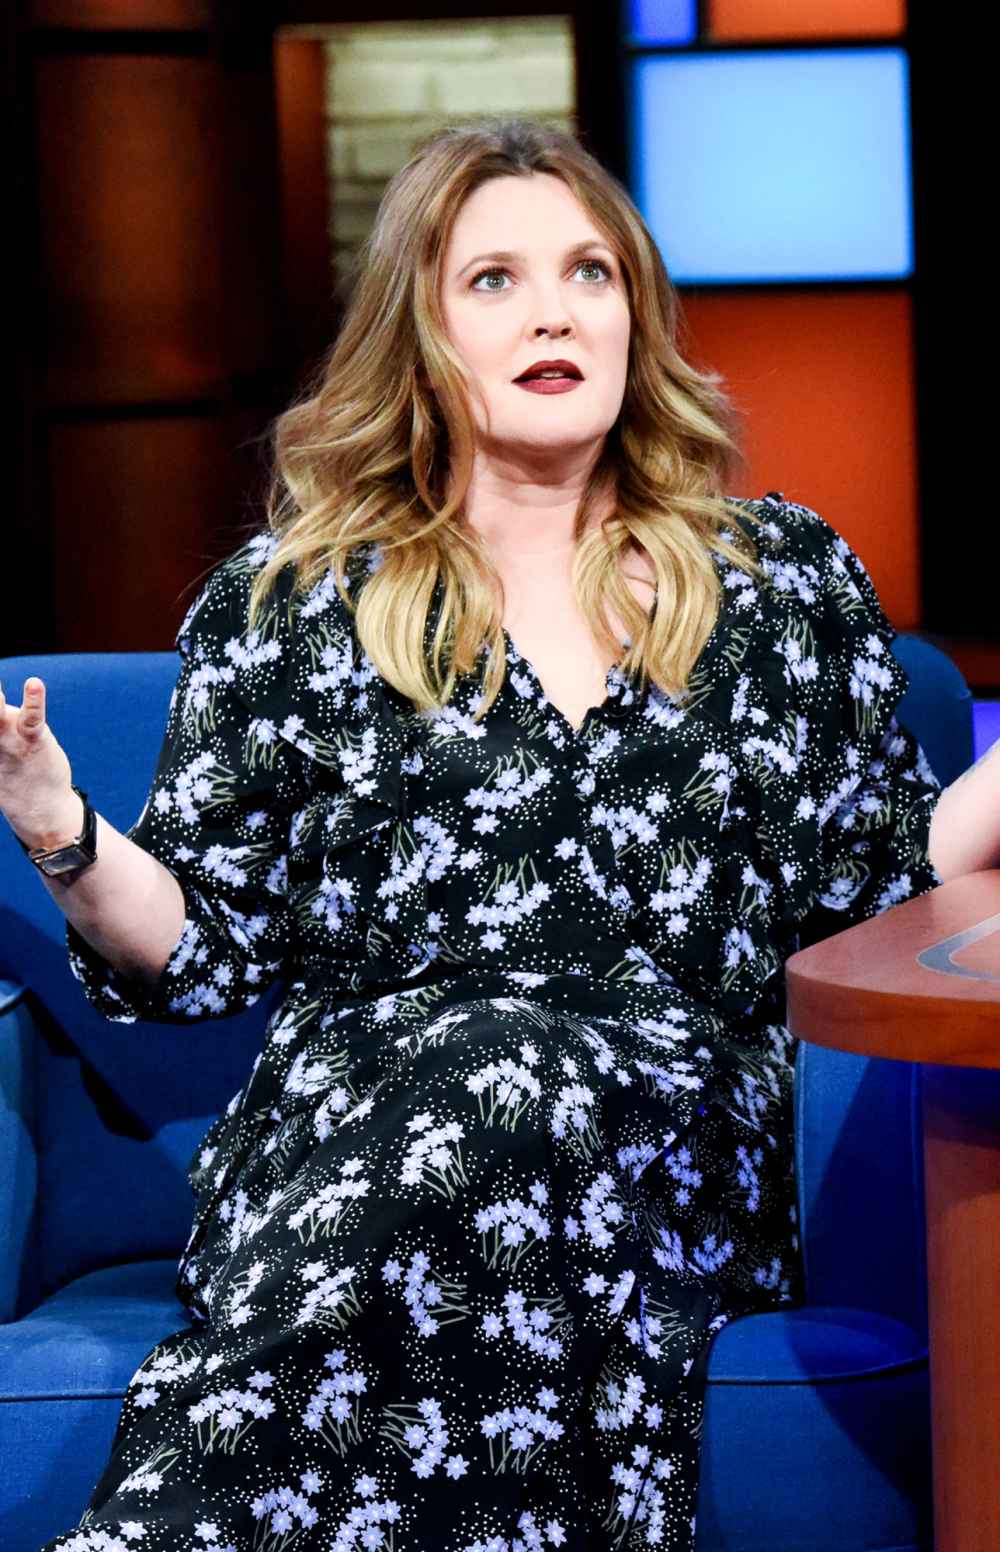 Drew Barrymore says she hasn't successfully dated in 4 years